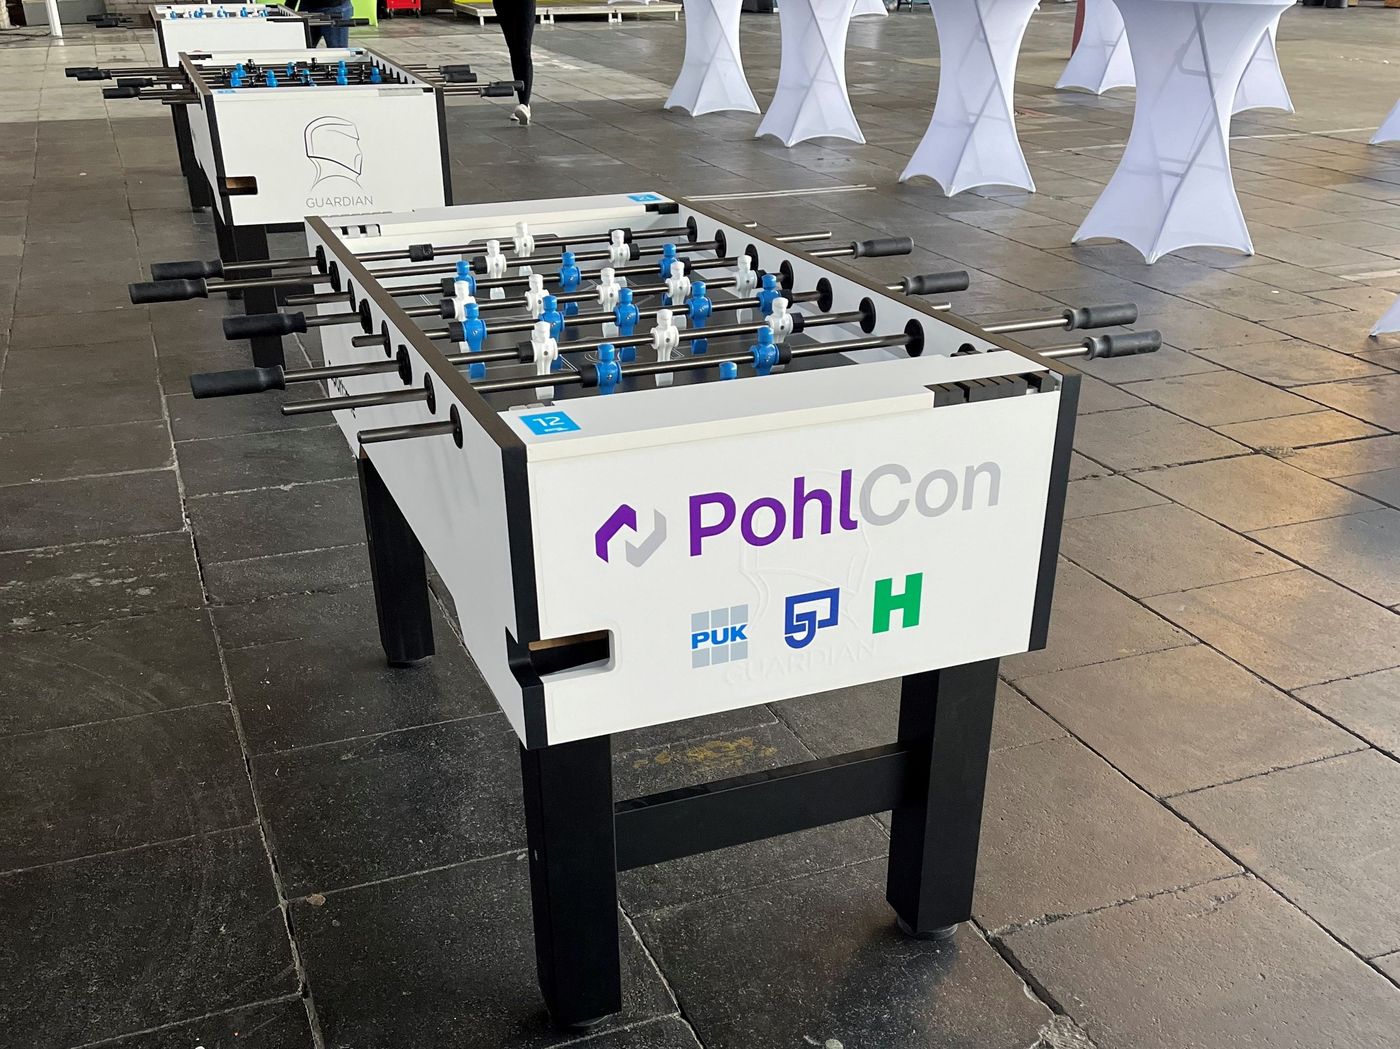 PohlCon on the Karriere Kick: First contact at the foosball table